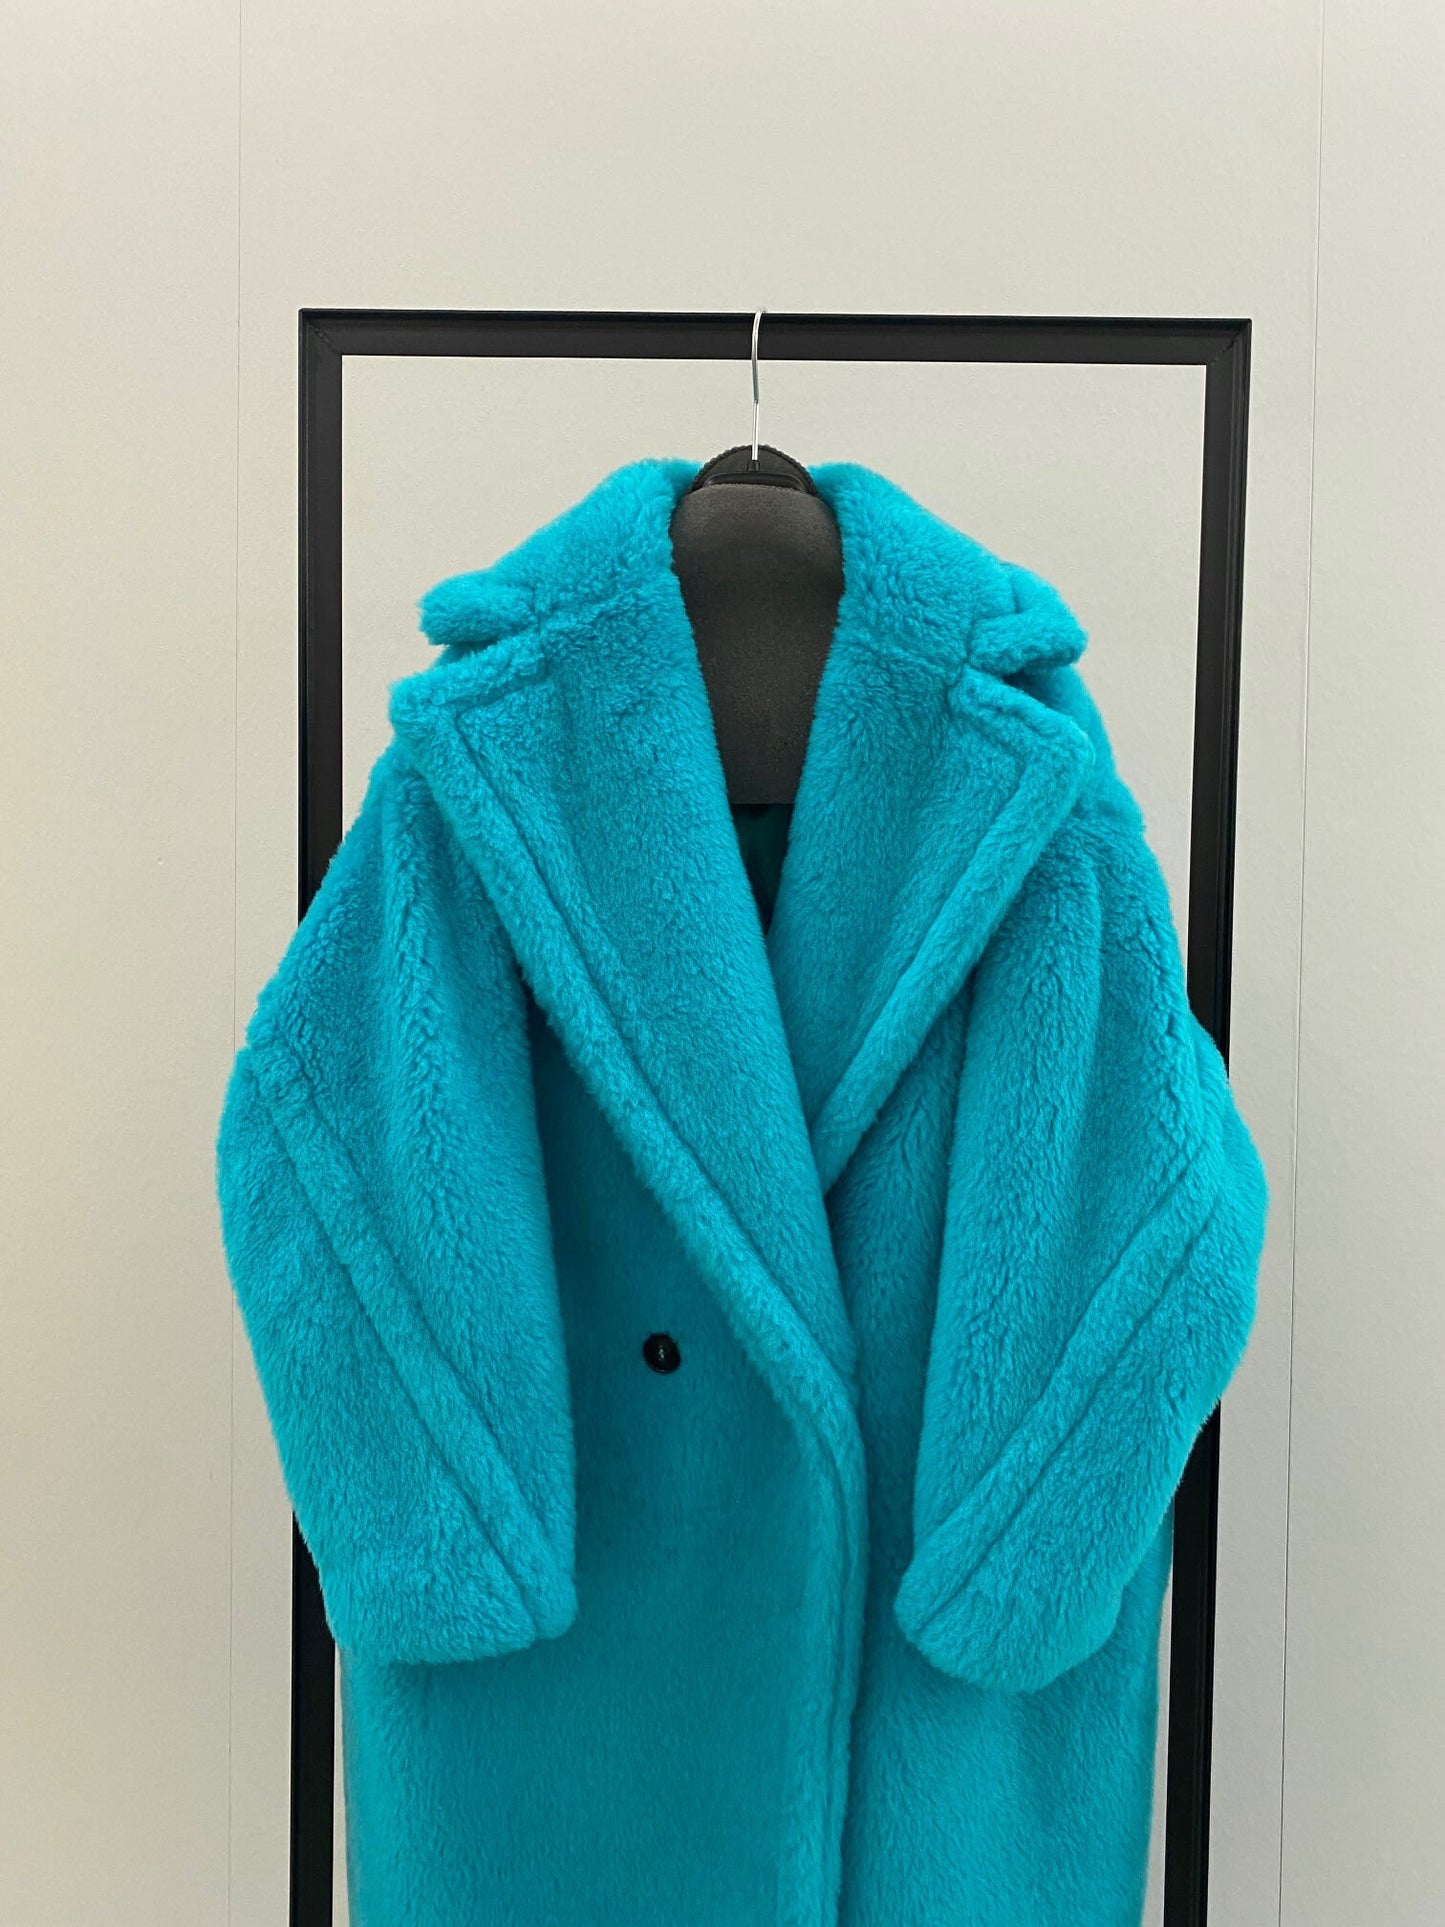 Wool Shearling Teddy Long Coat Loose fit oversized coat Turquoise